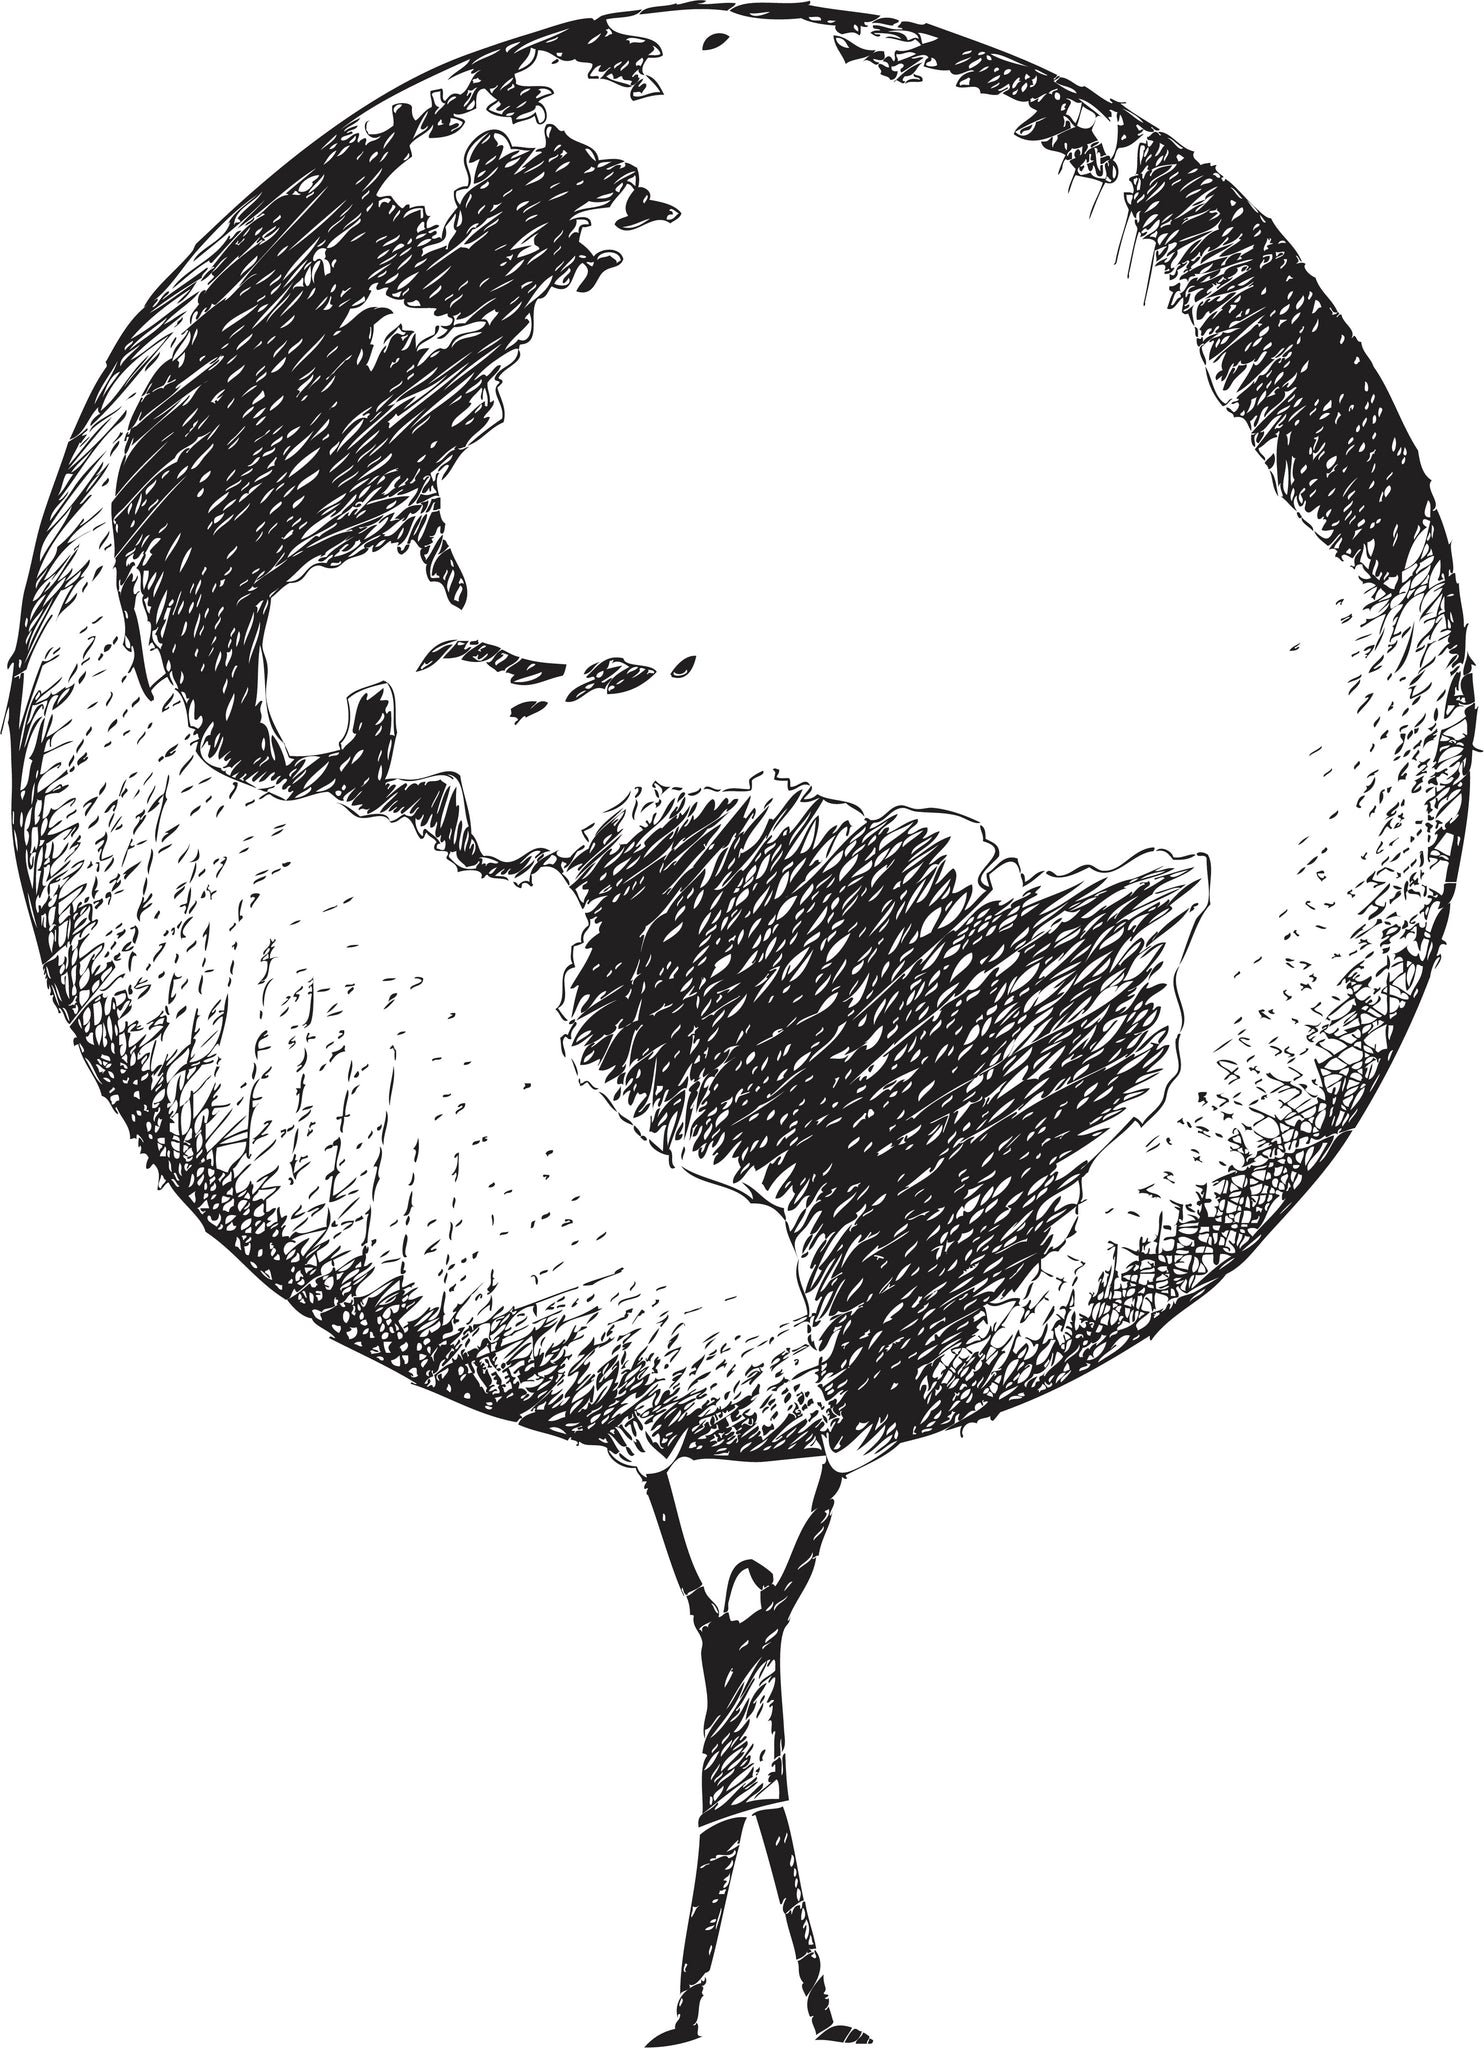 Man Holding the World Earth Pencil Sketch Drawing Vinyl Decal Sticker